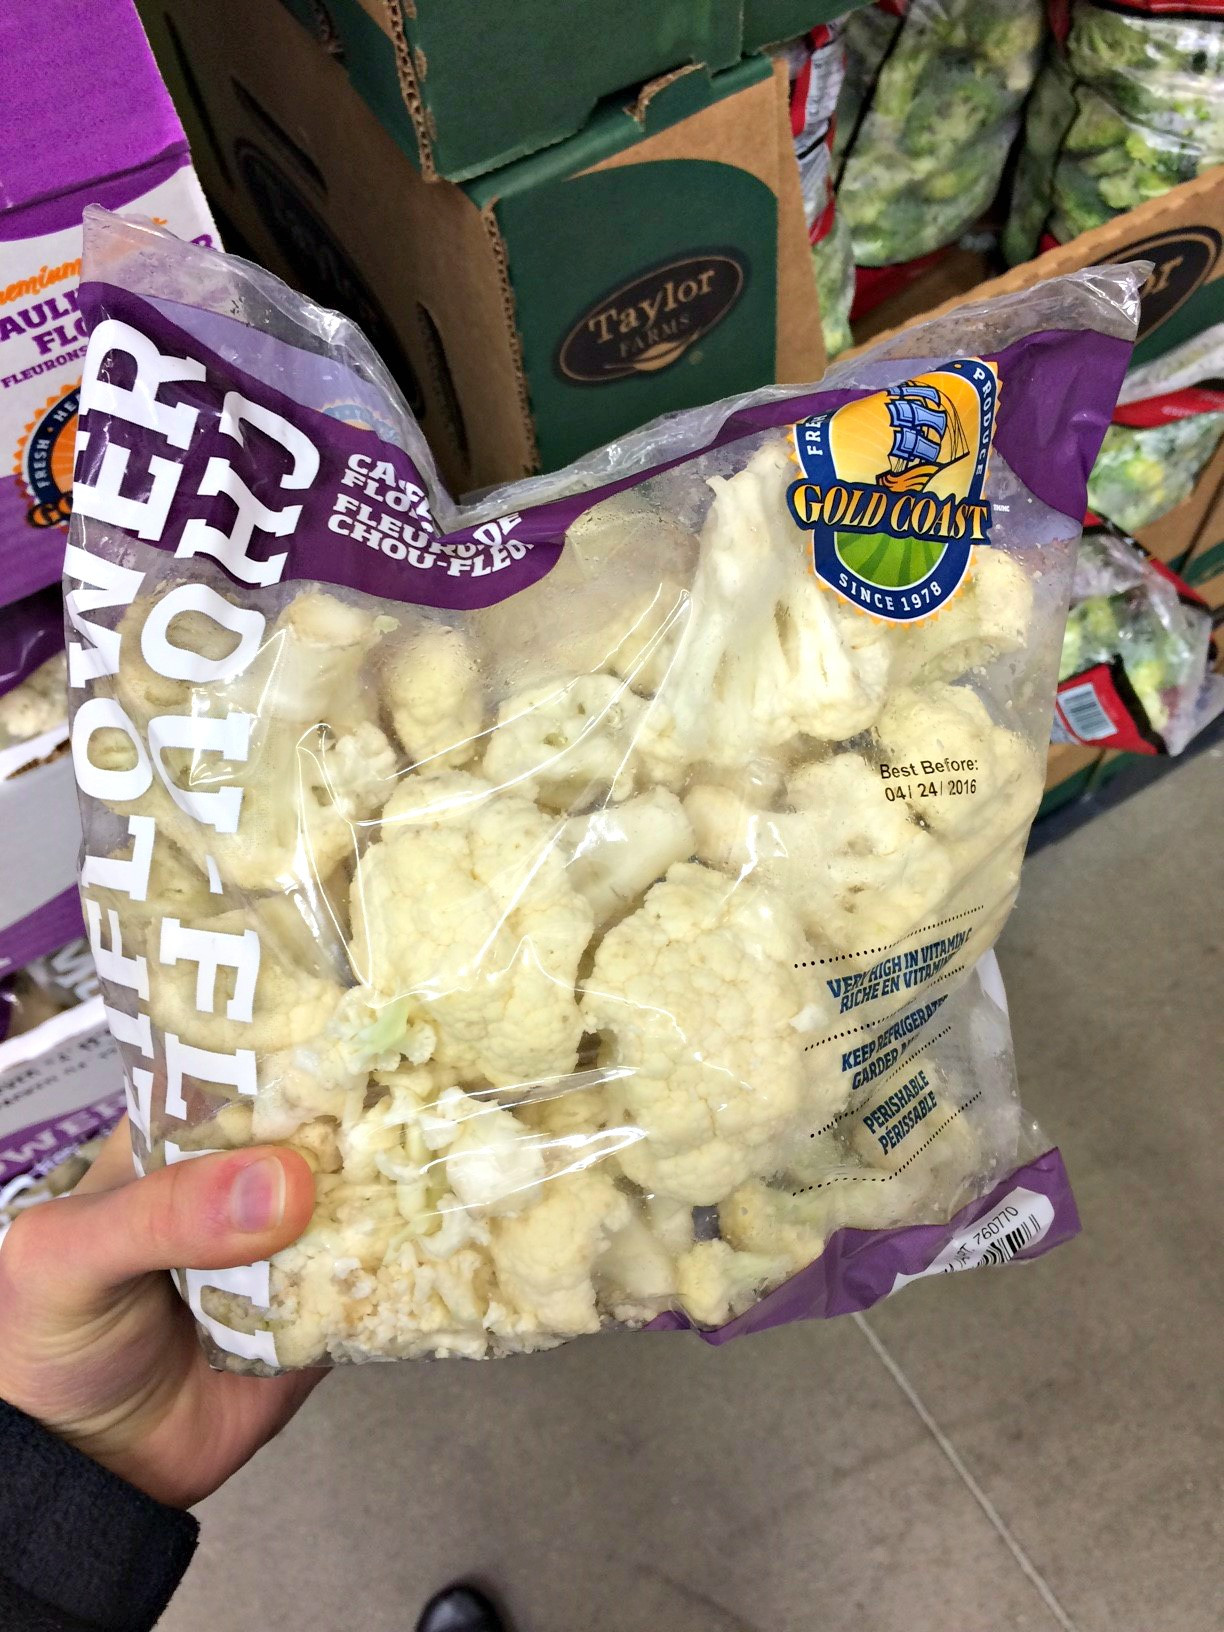 Cauliflower Rice Costco
 The Best Paleo Products to Buy at Costco Clean Eating